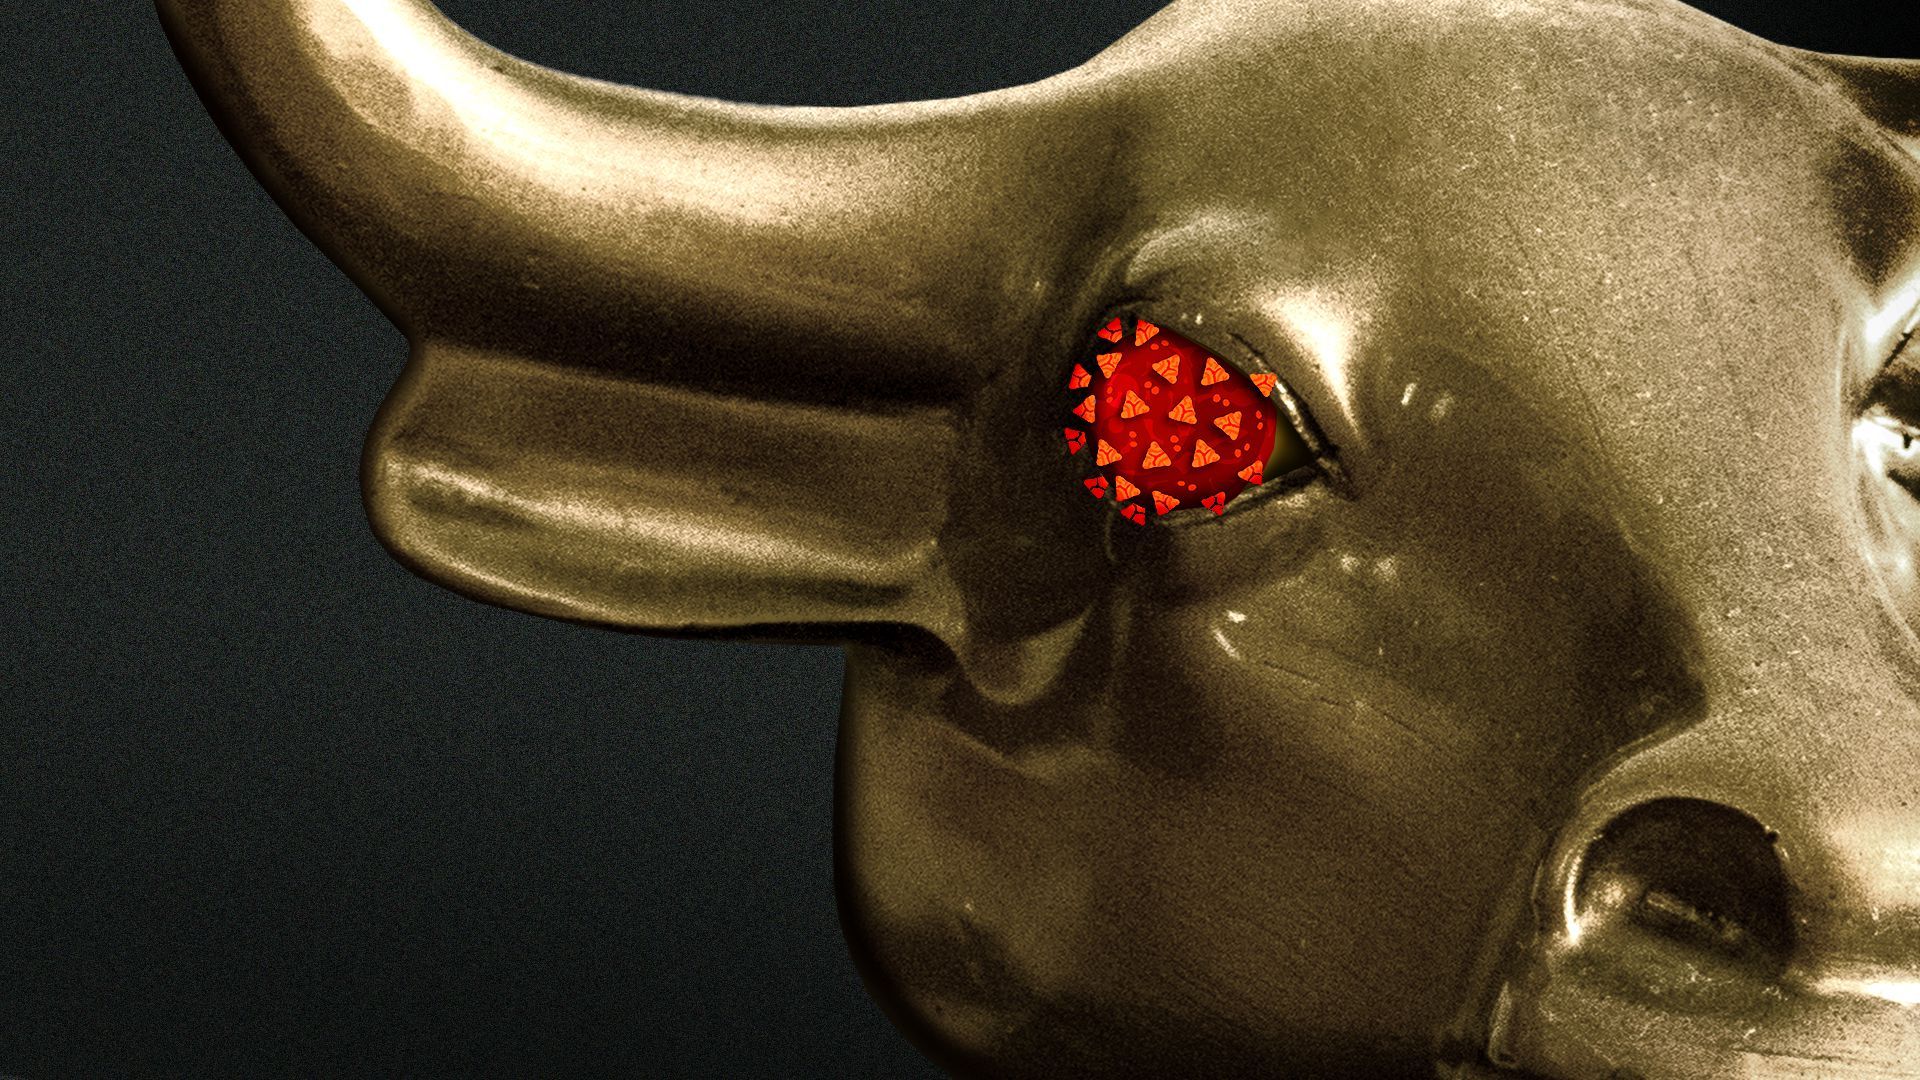 Illustration of the Wall Street Bull with a red Covid cell in place of its eye